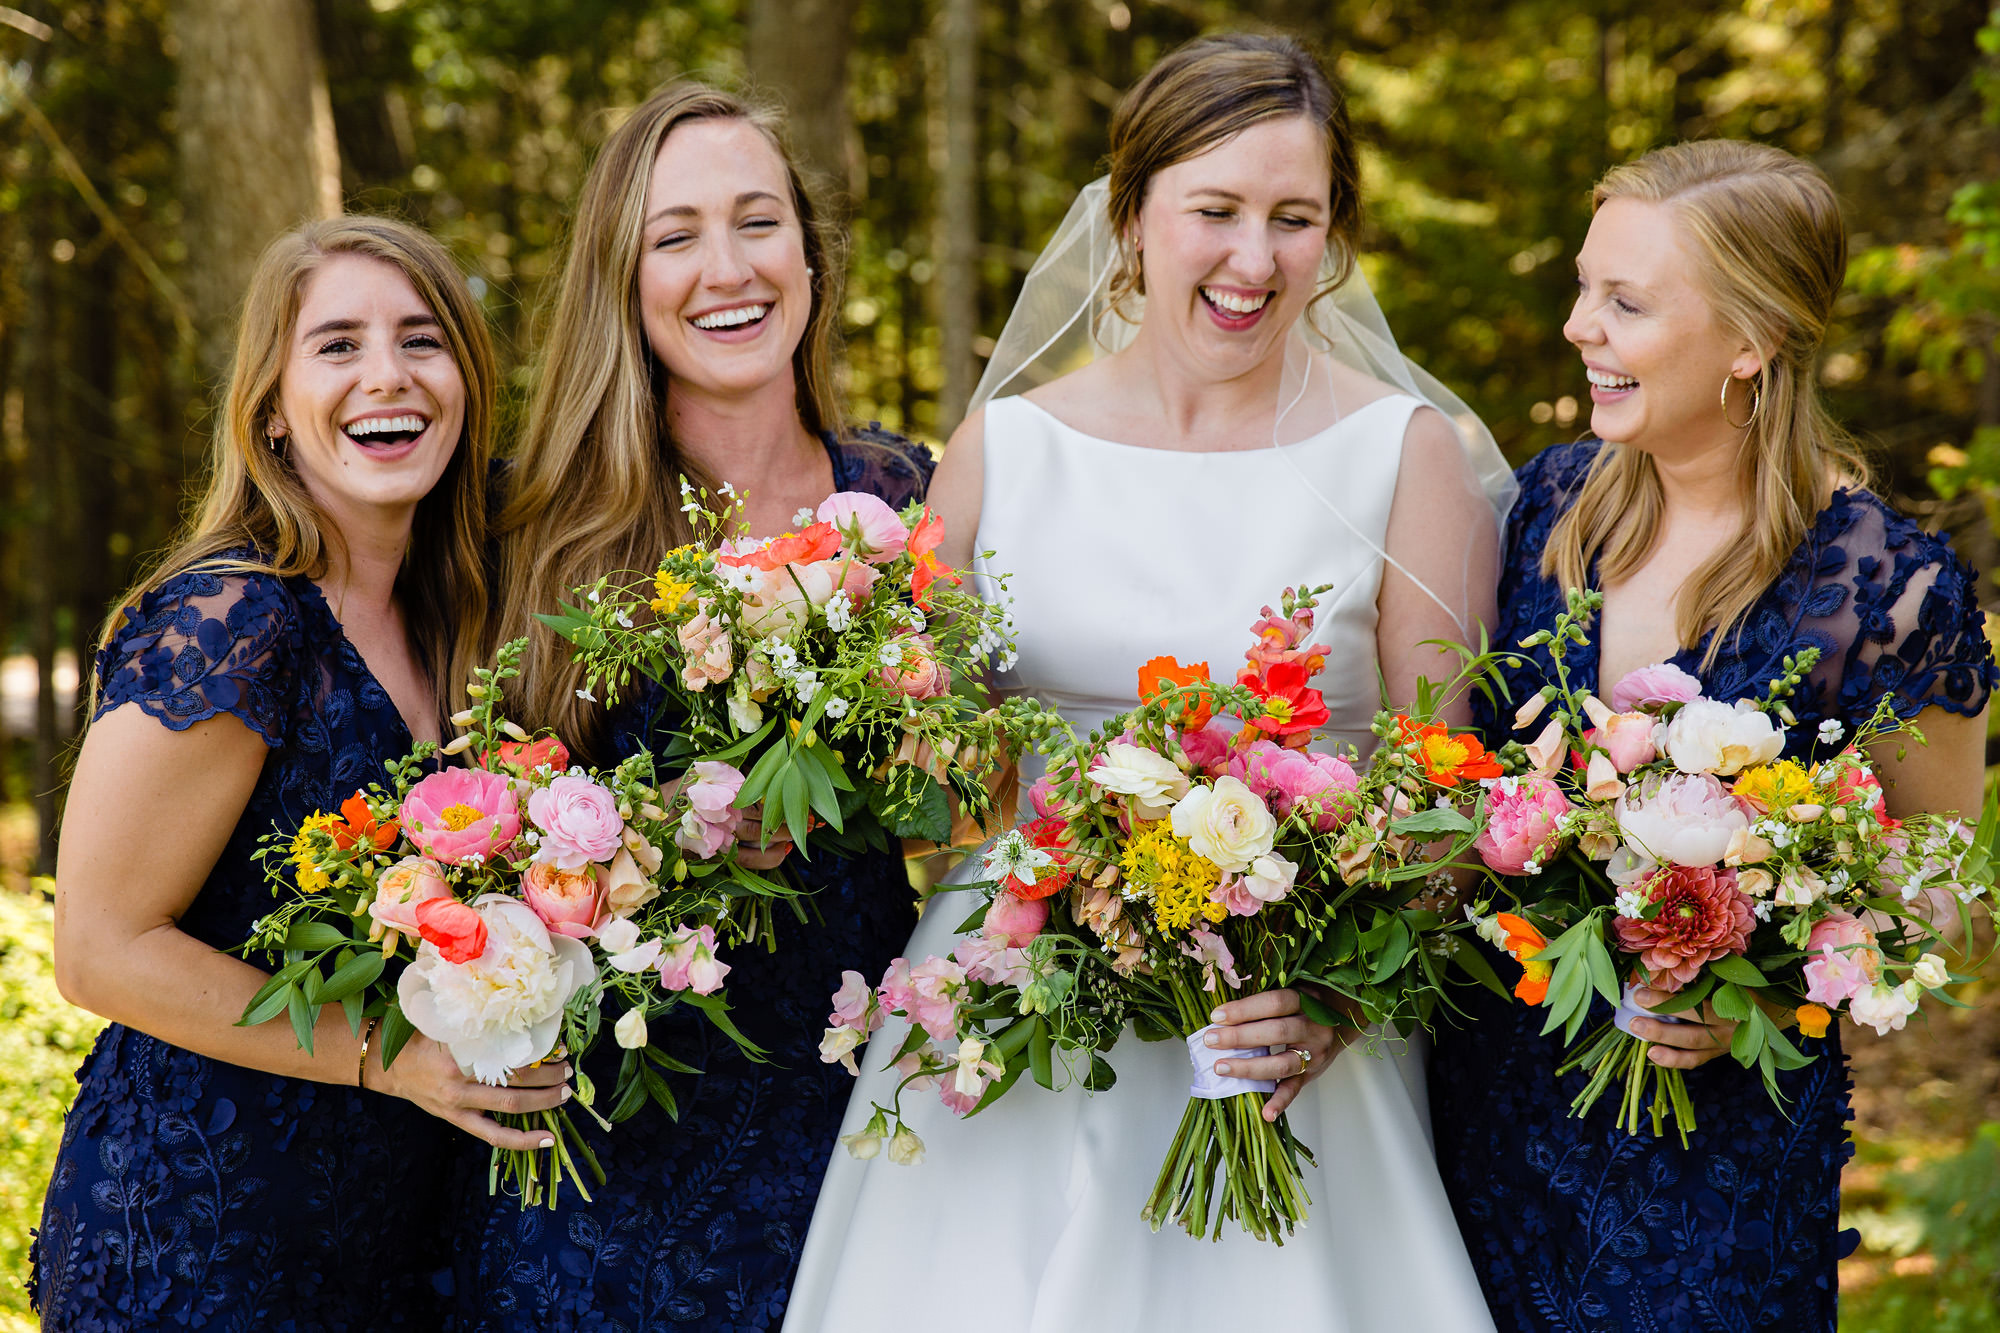 The bride with her bridesmaids at her wedding in Maine